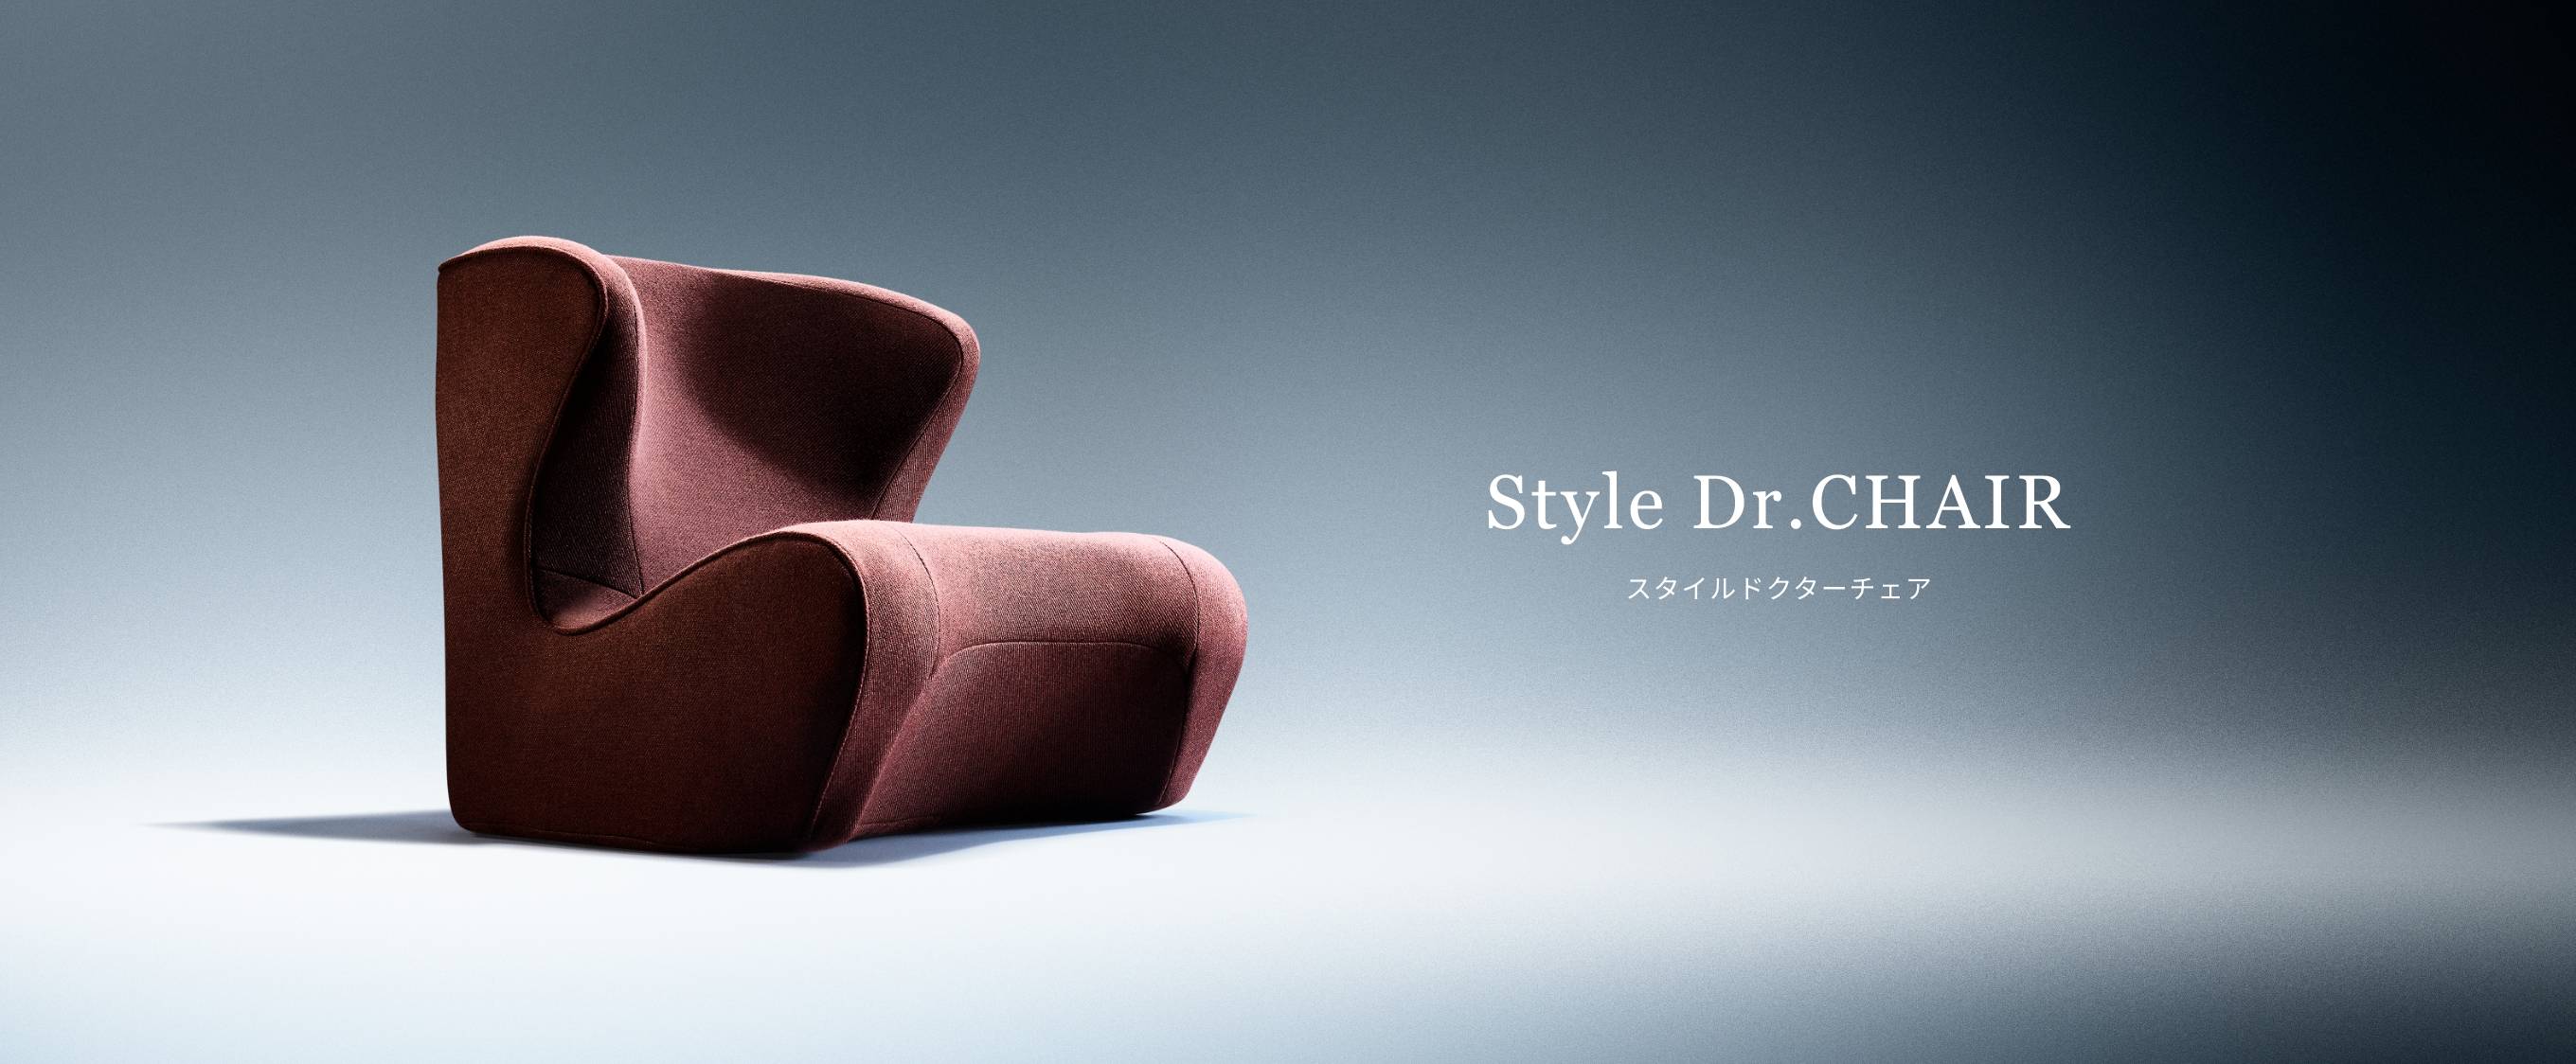 Style Dr.CHAIR（スタイルドクターチェア） | Style | BRANDS ...